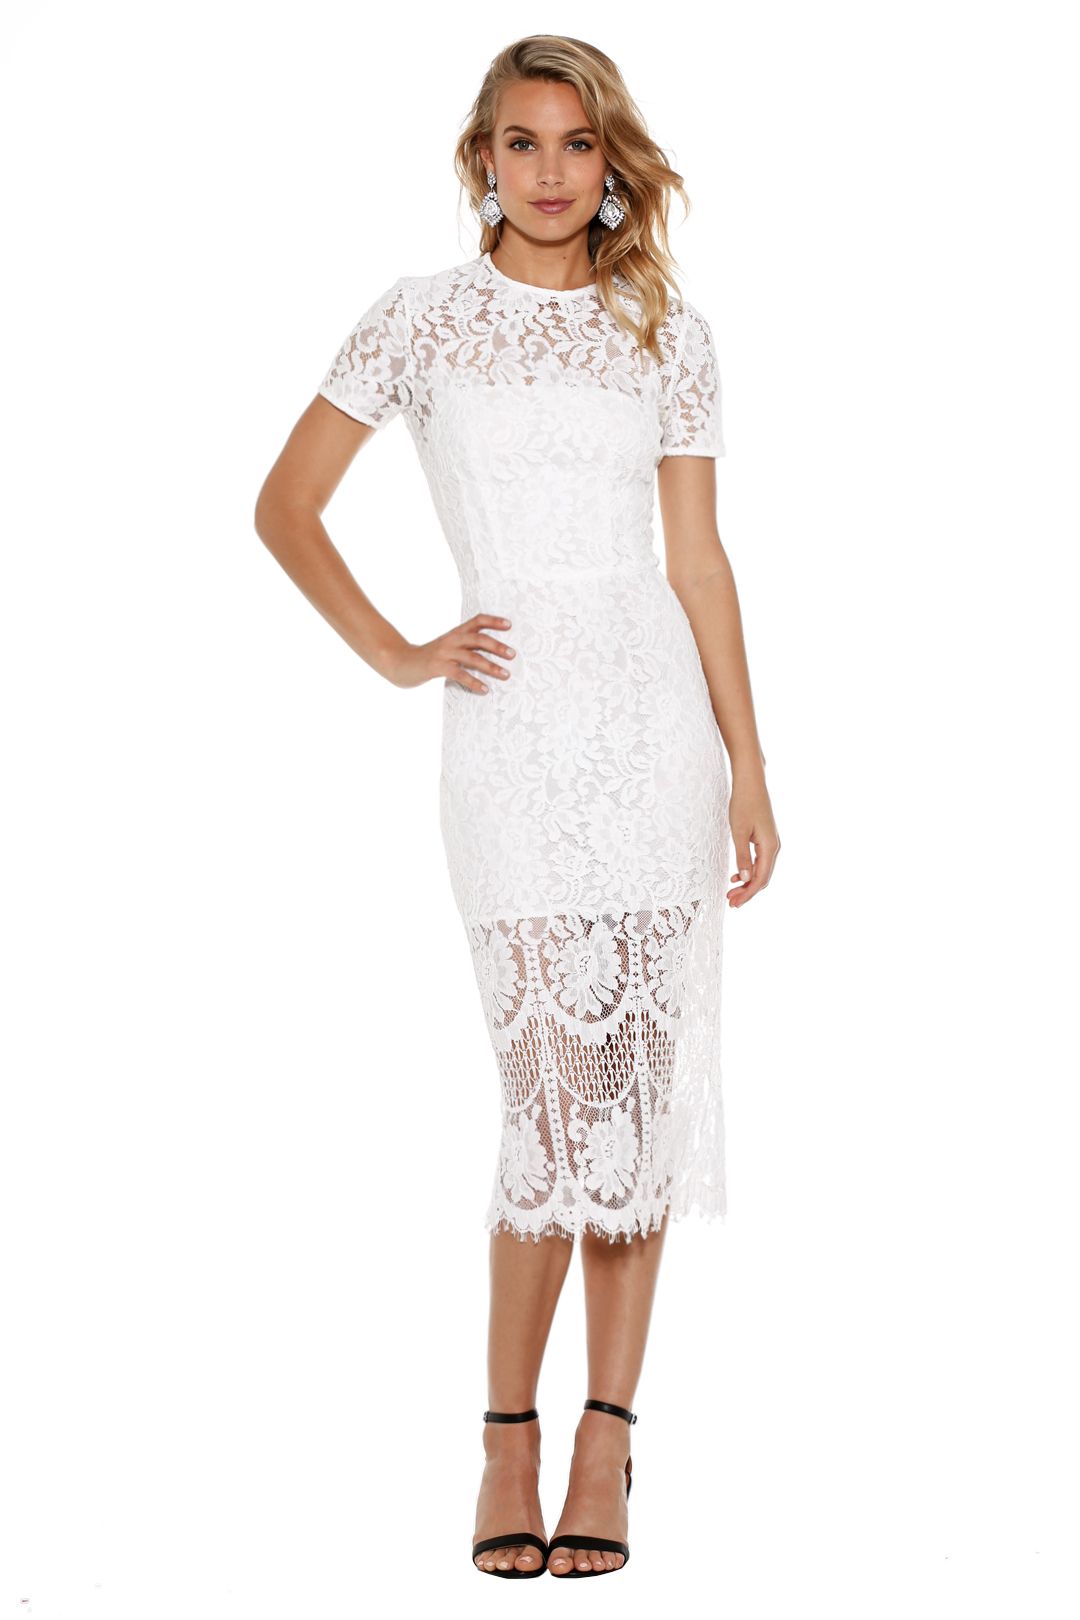 Lover - Snow Lace Sheath Dress - White - Front